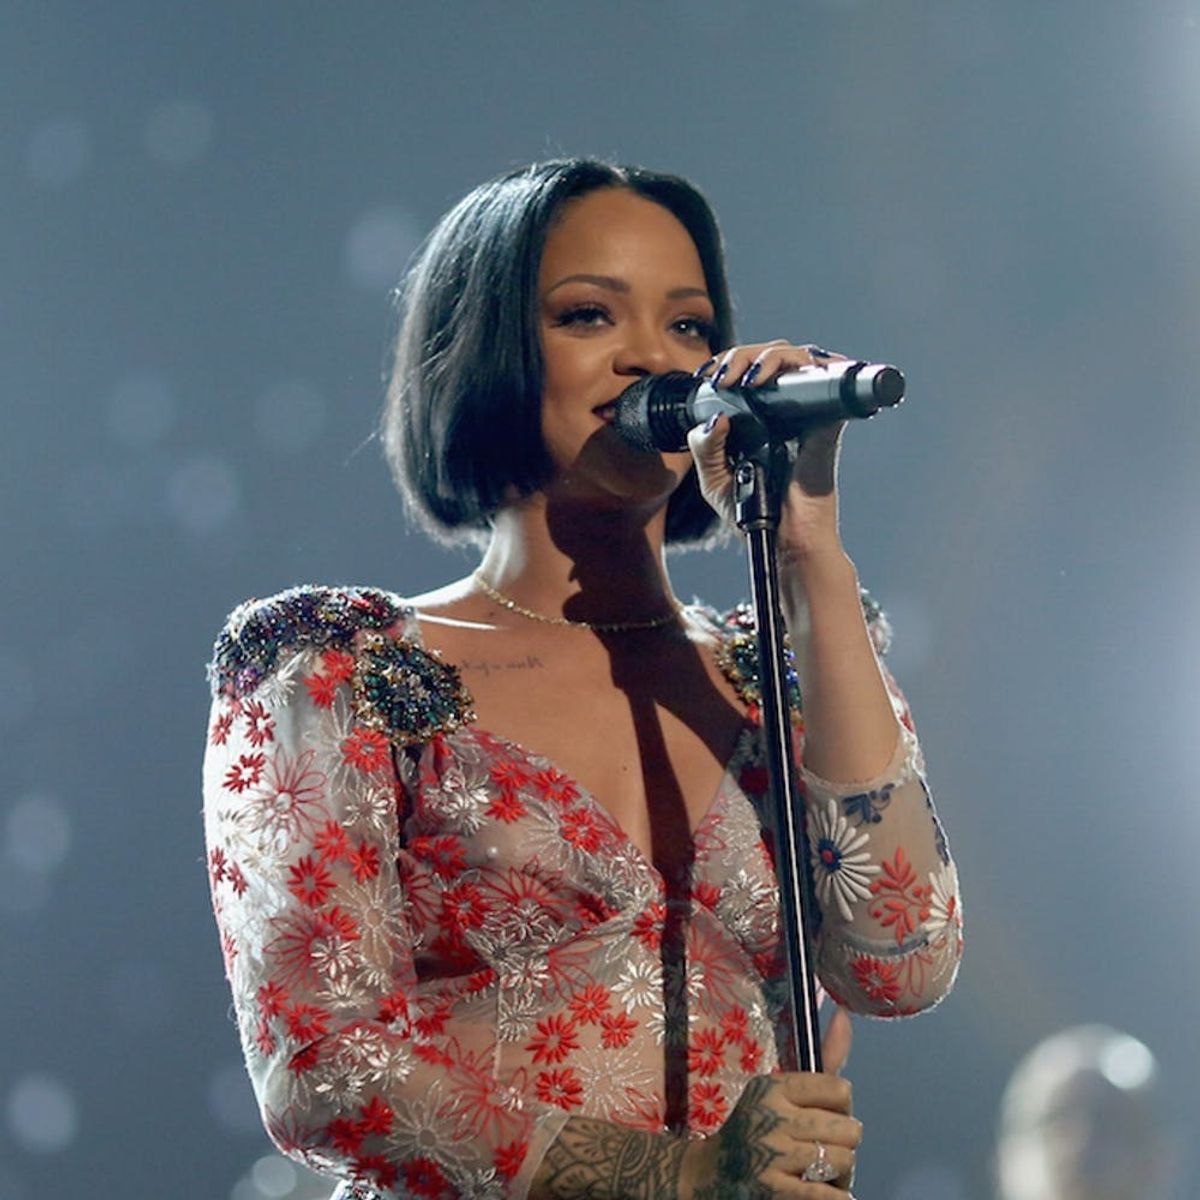 Rihanna Just Cancelled Her Grammys Performance at the Last Minute